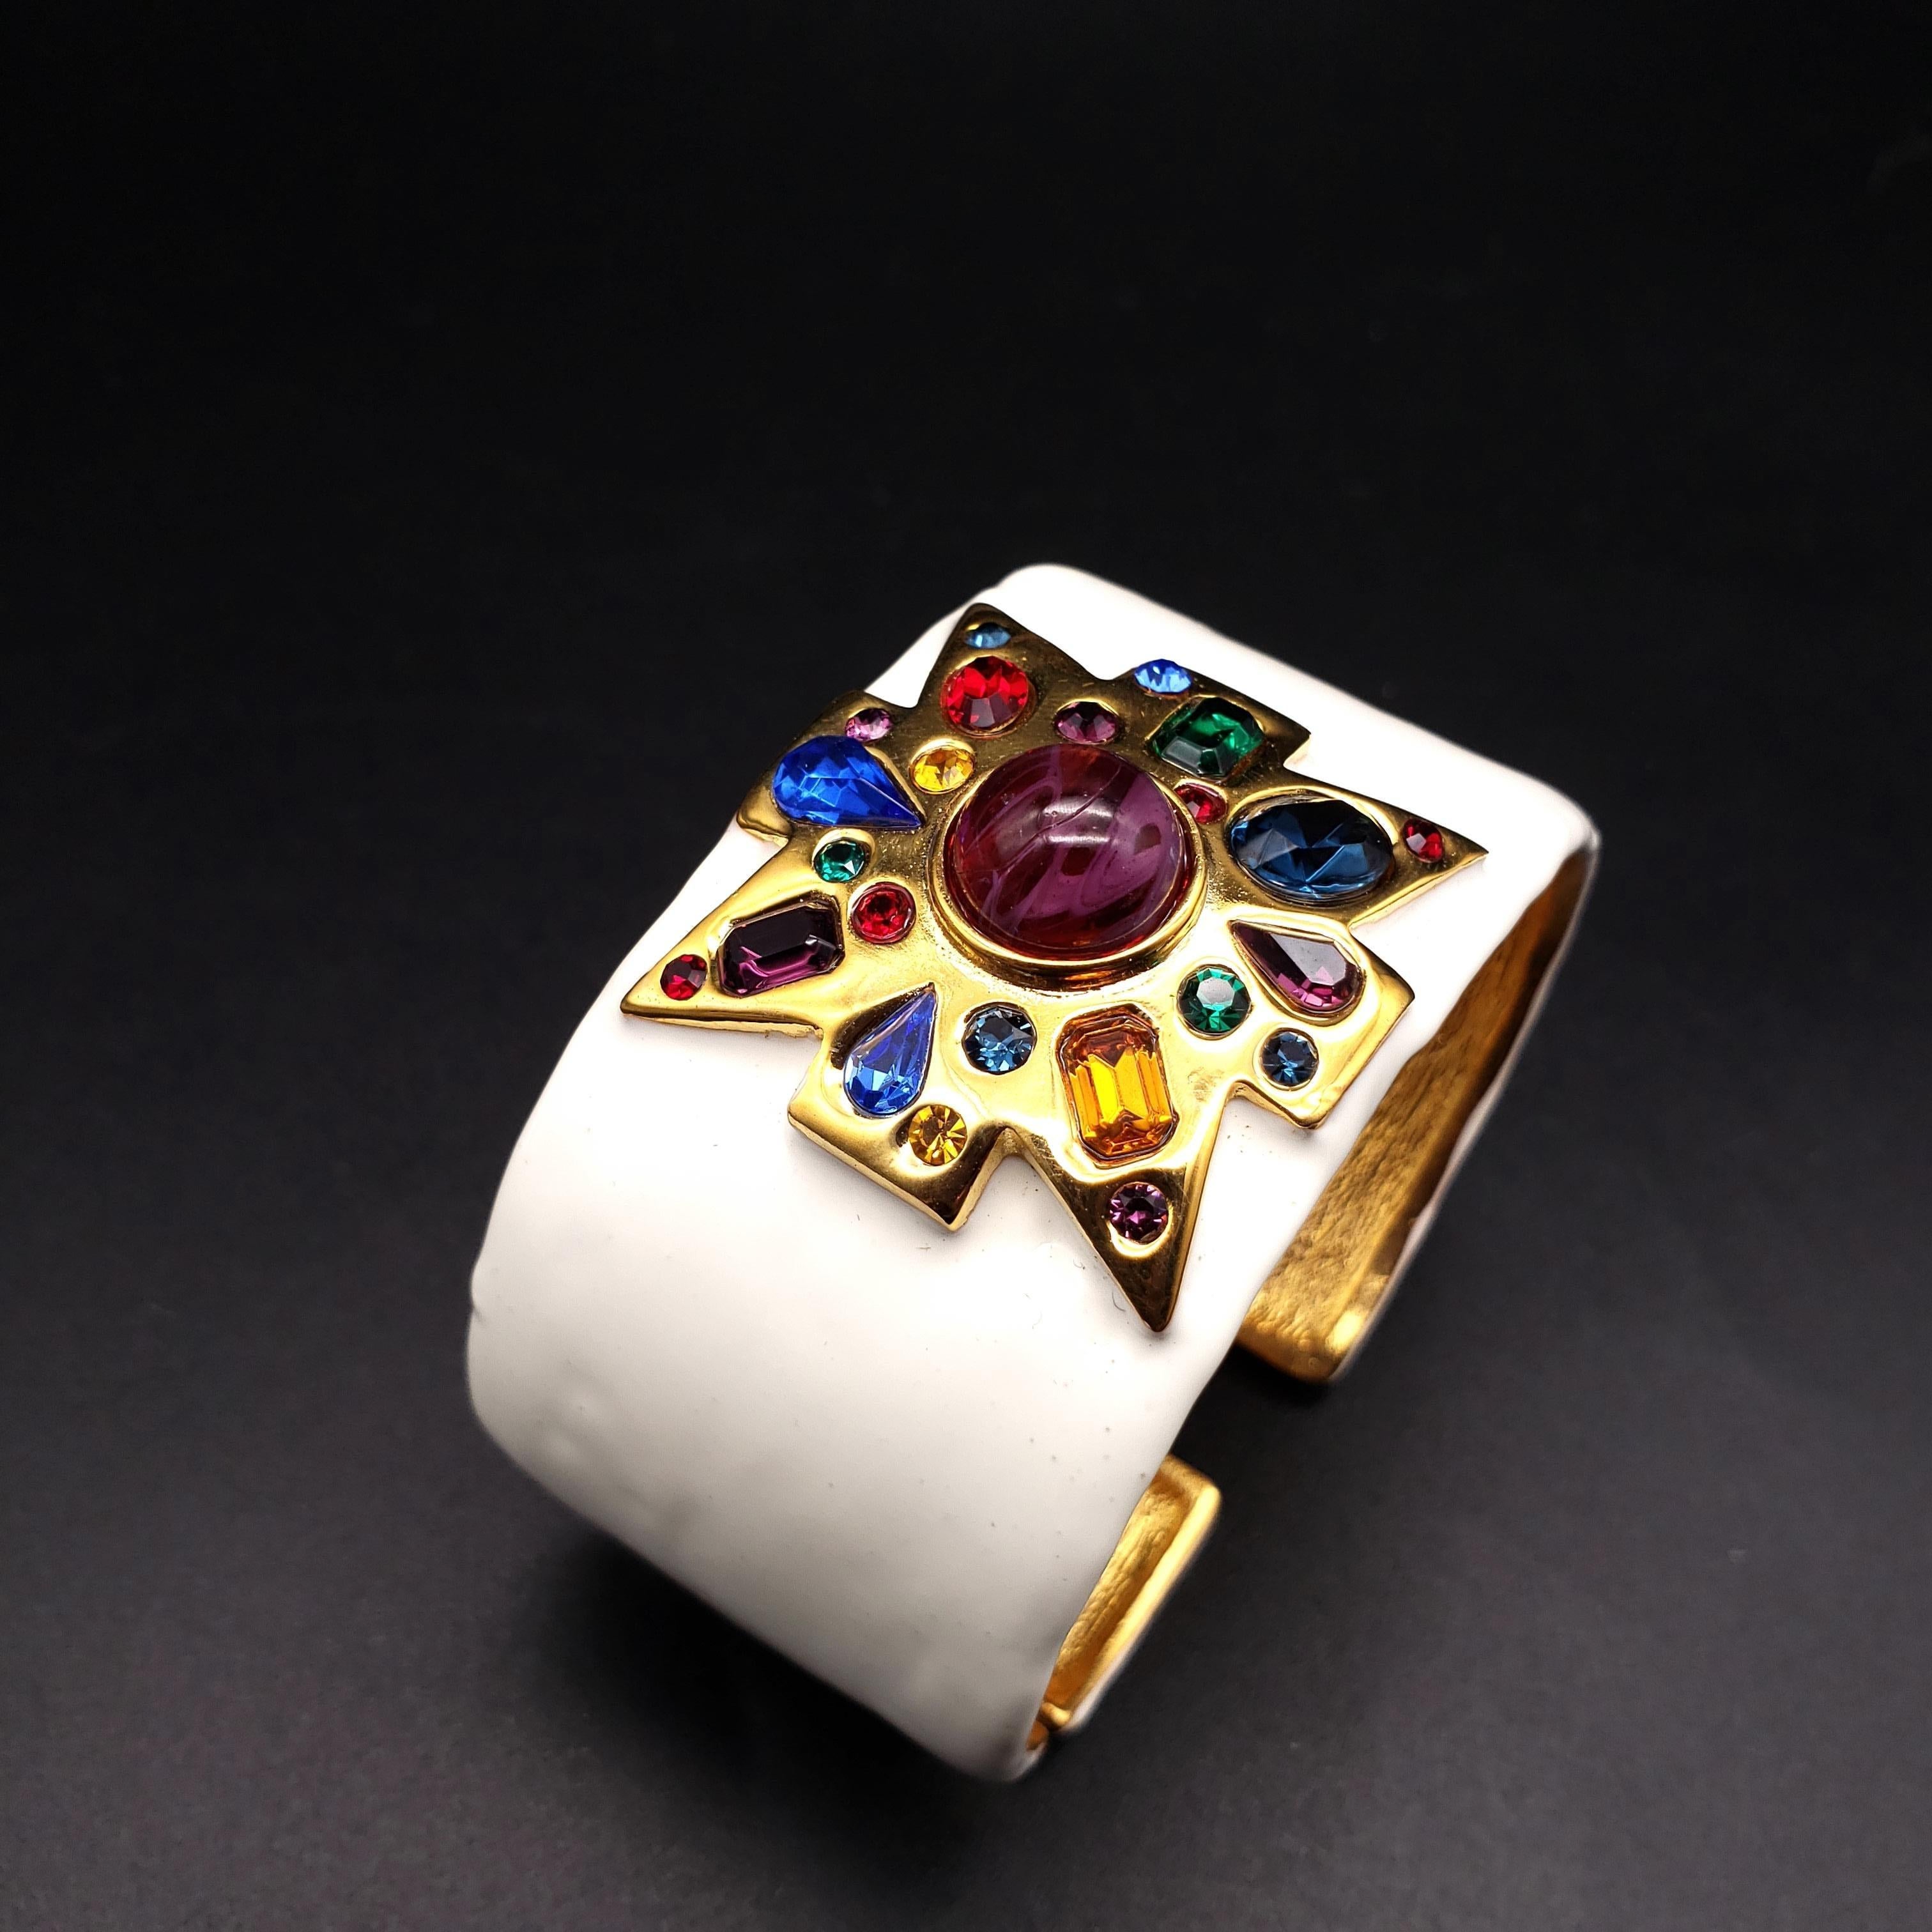 A bracelet by Kenneth Jay Lane. Painted white enamel, with a stylized maltese cross motif in gold. The centerpiece features a single teal-green resin cabochon, surrounded by clear crystals. Hinged bangle cuff.

Hallmarks: Kenneth © Lane
Inner